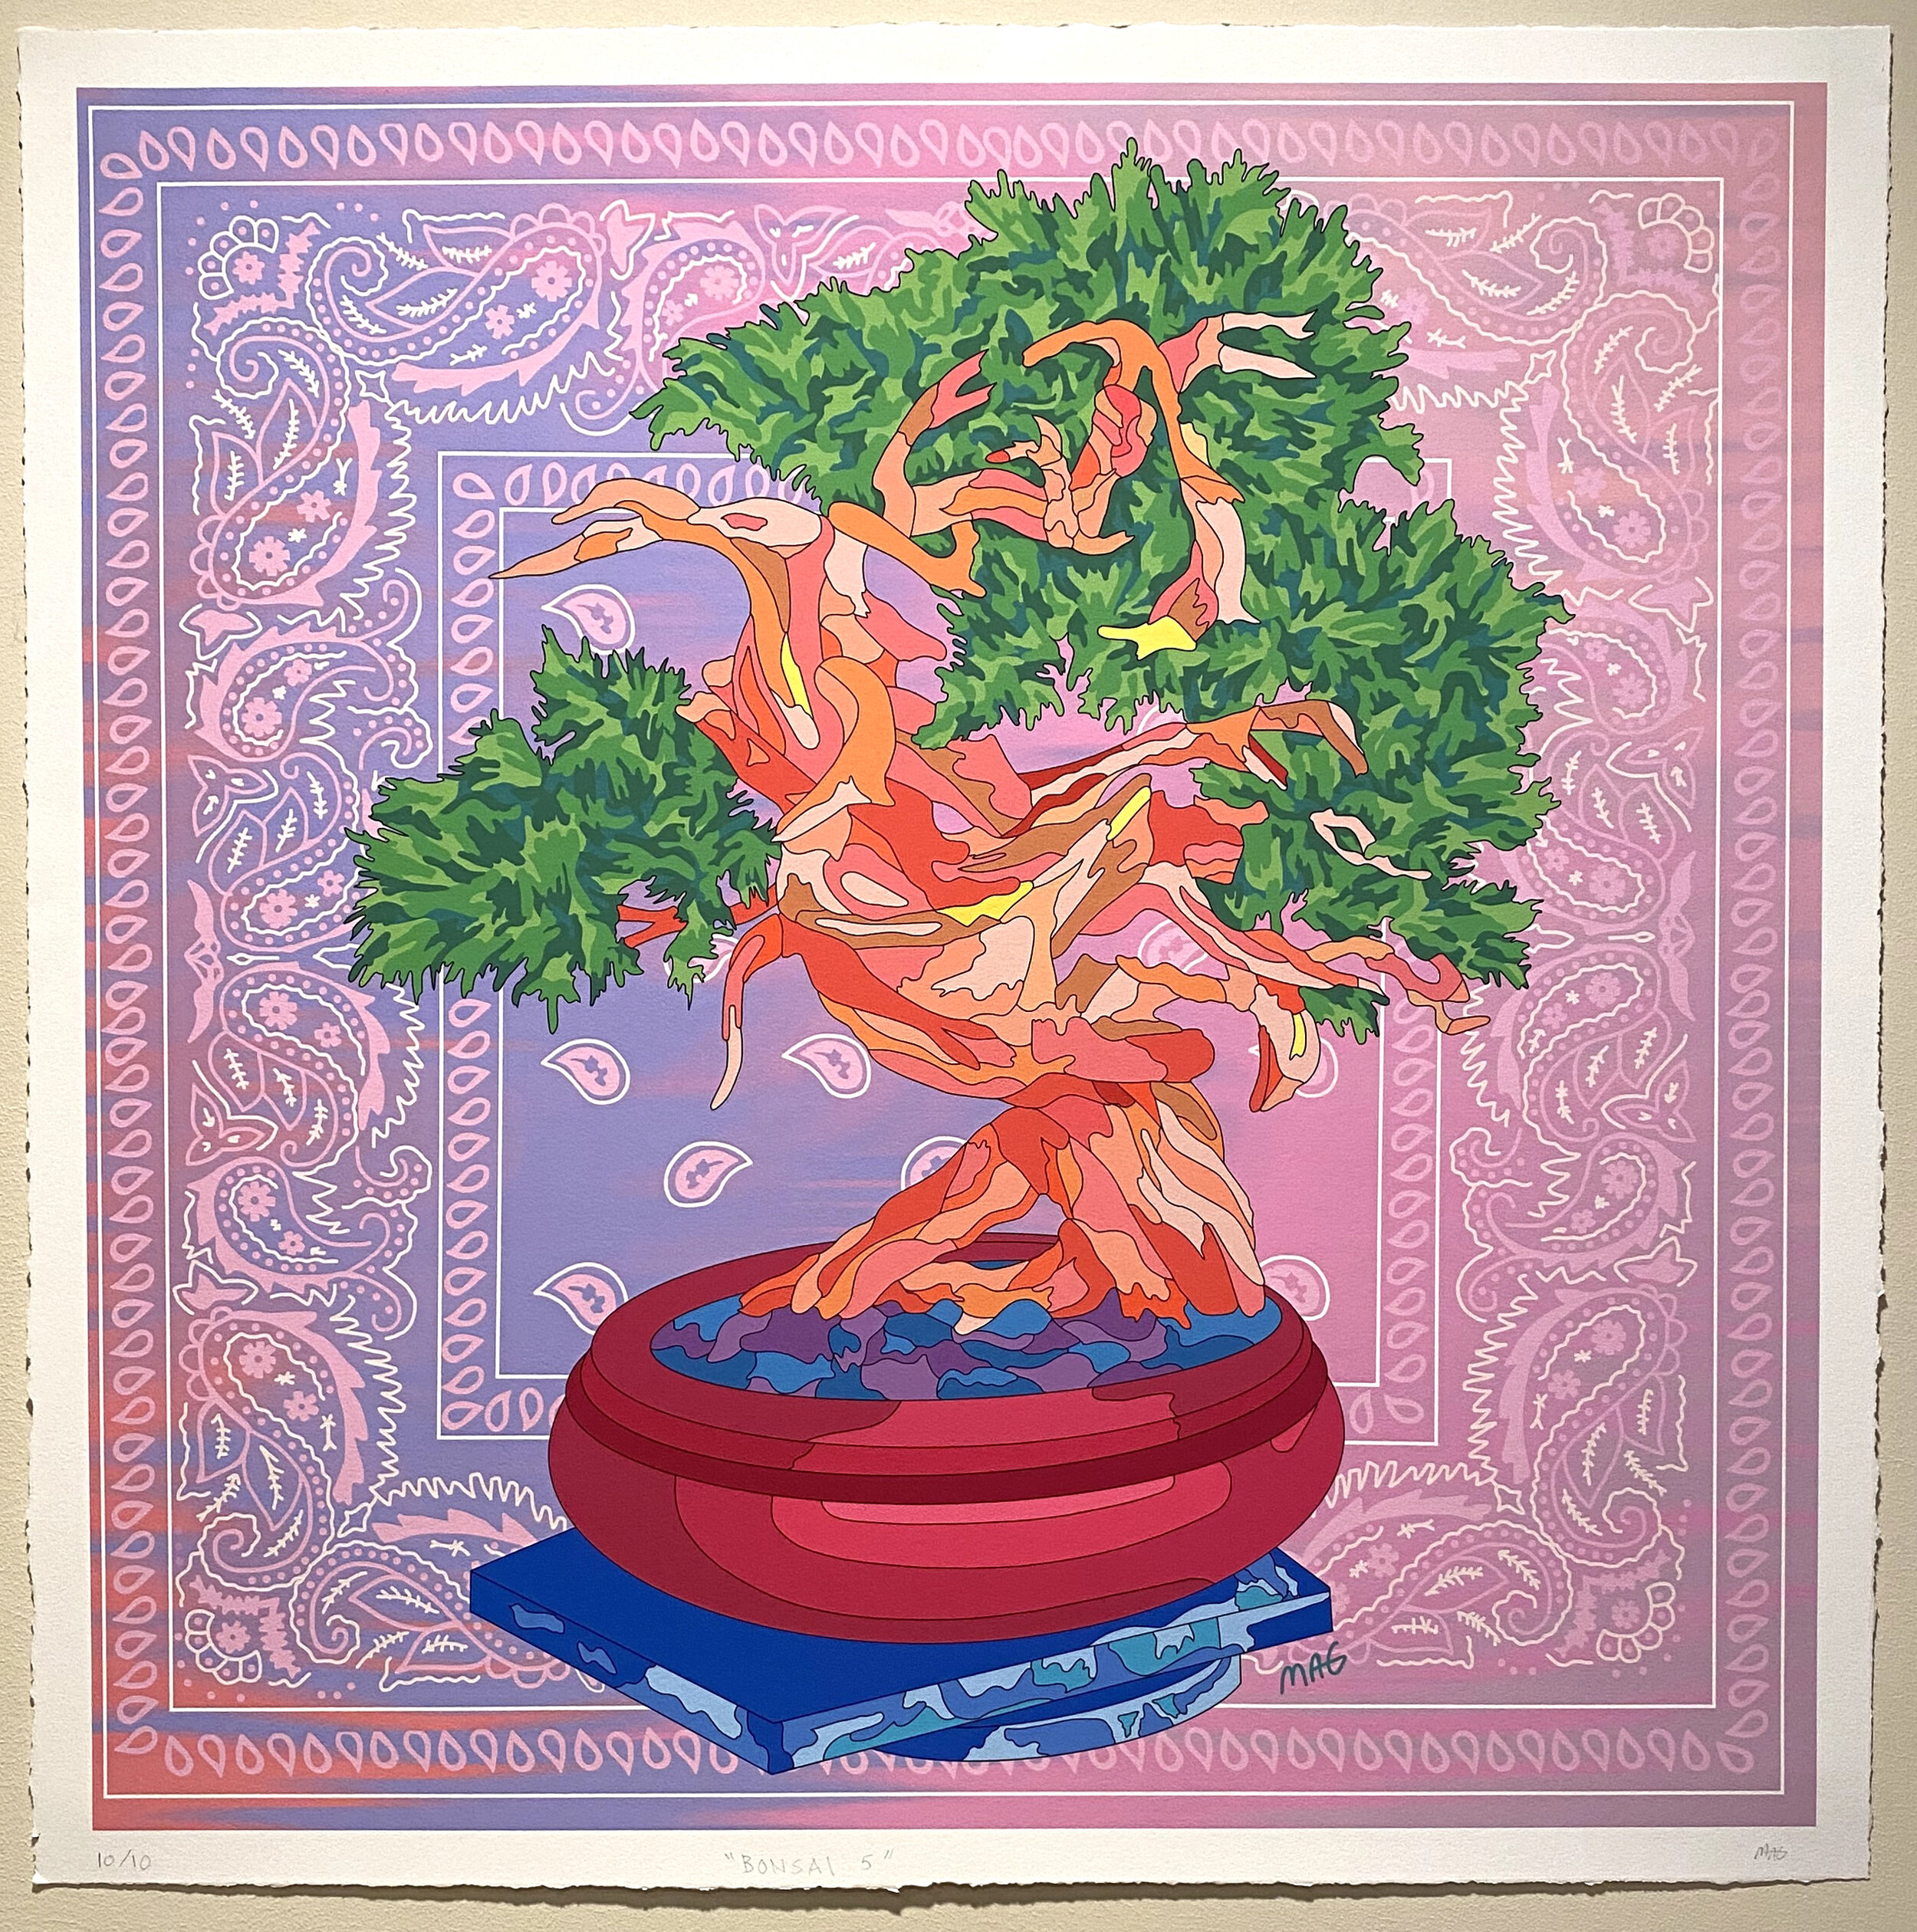   “Bonsai 5”   Digital Painting, 2019  Limited Edition- 10 Prints Only  Size Variable: 12x12-36x36 inches  Email molly@artbymag.com to inquire 